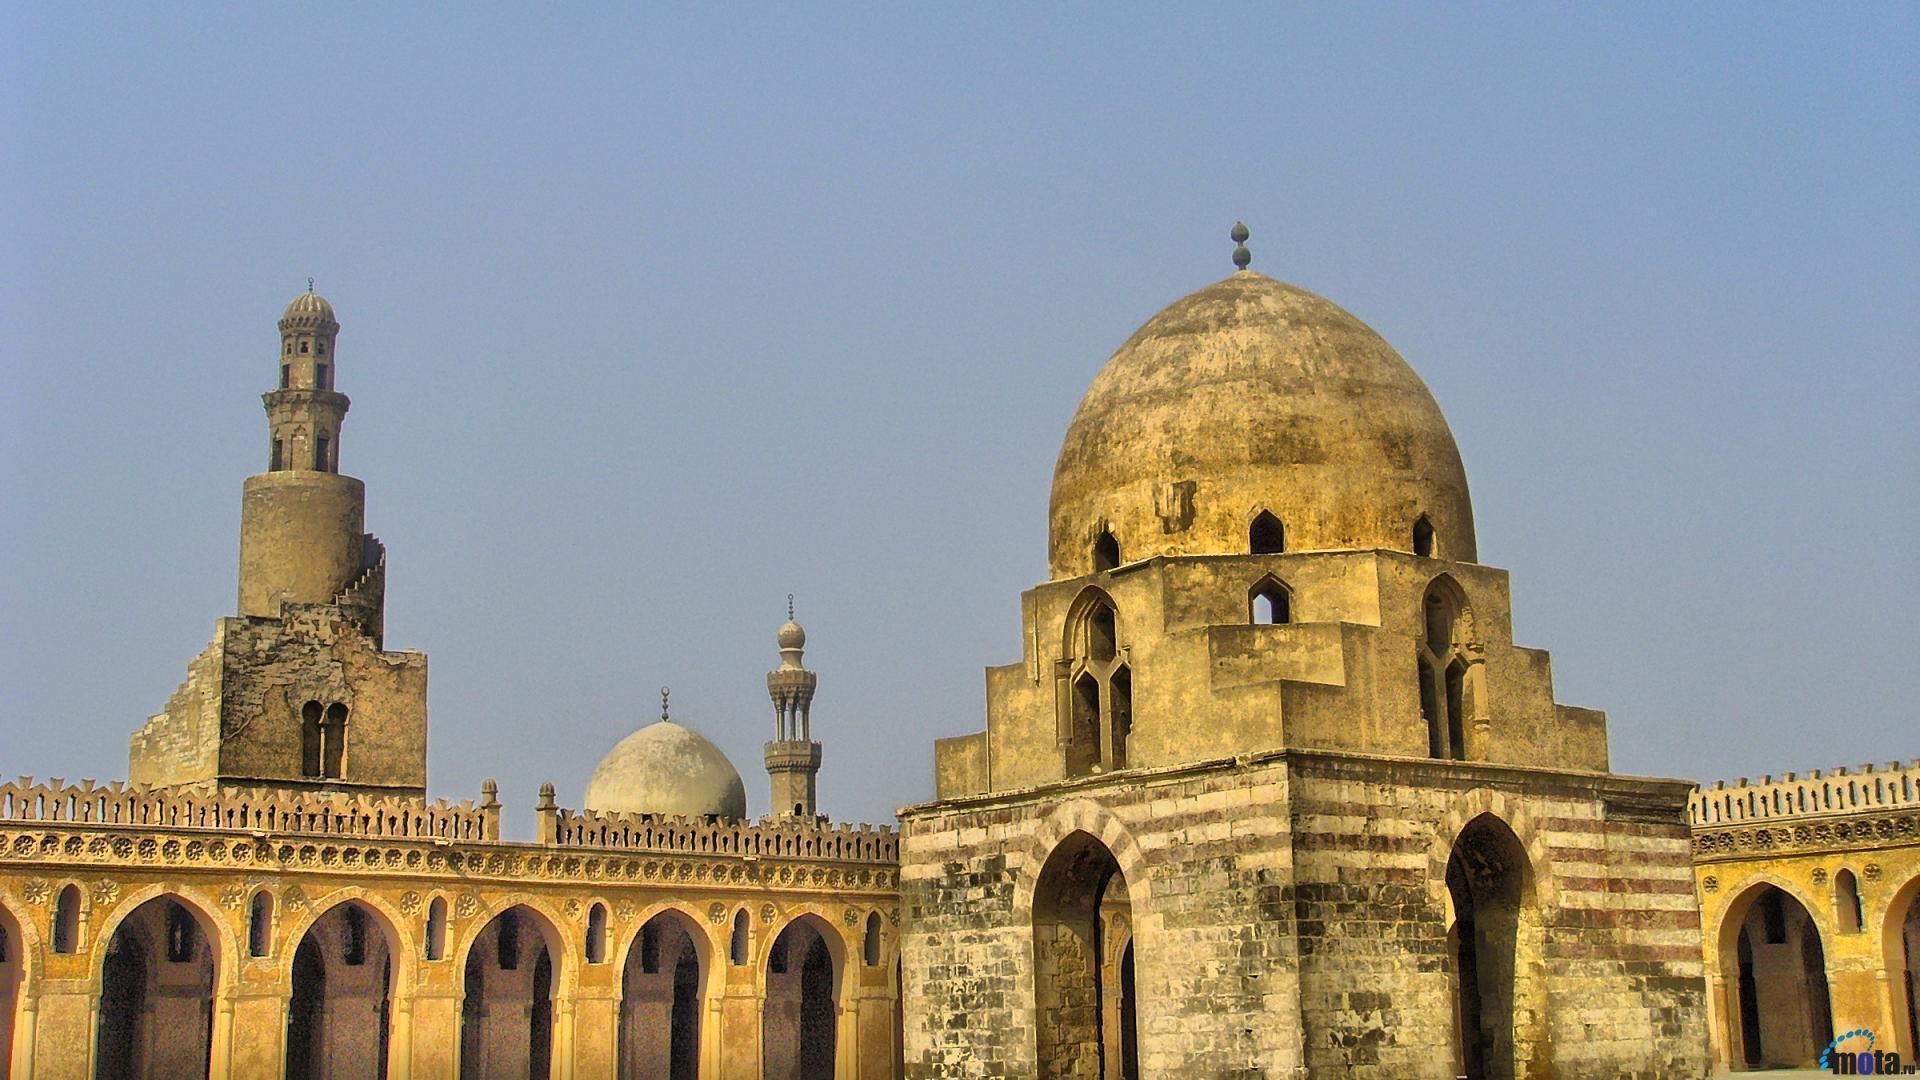 Mosque in Cairo wallpaper and image, picture, photo